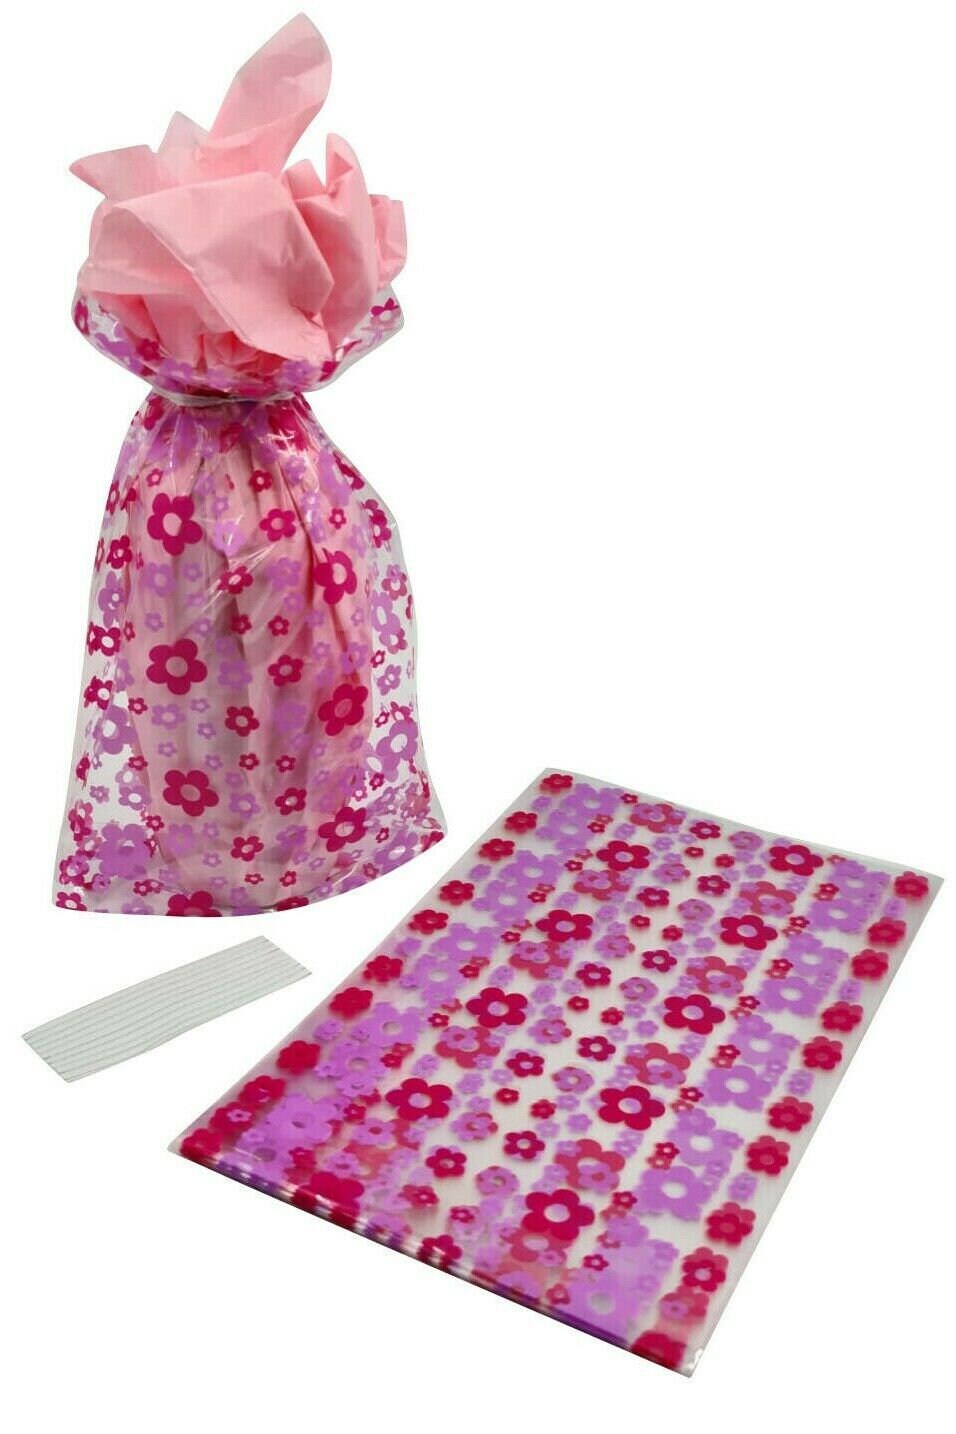 12 Cellophane Cello Party Bags With Twist Ties Daisy Flowers Design Keechi & co.